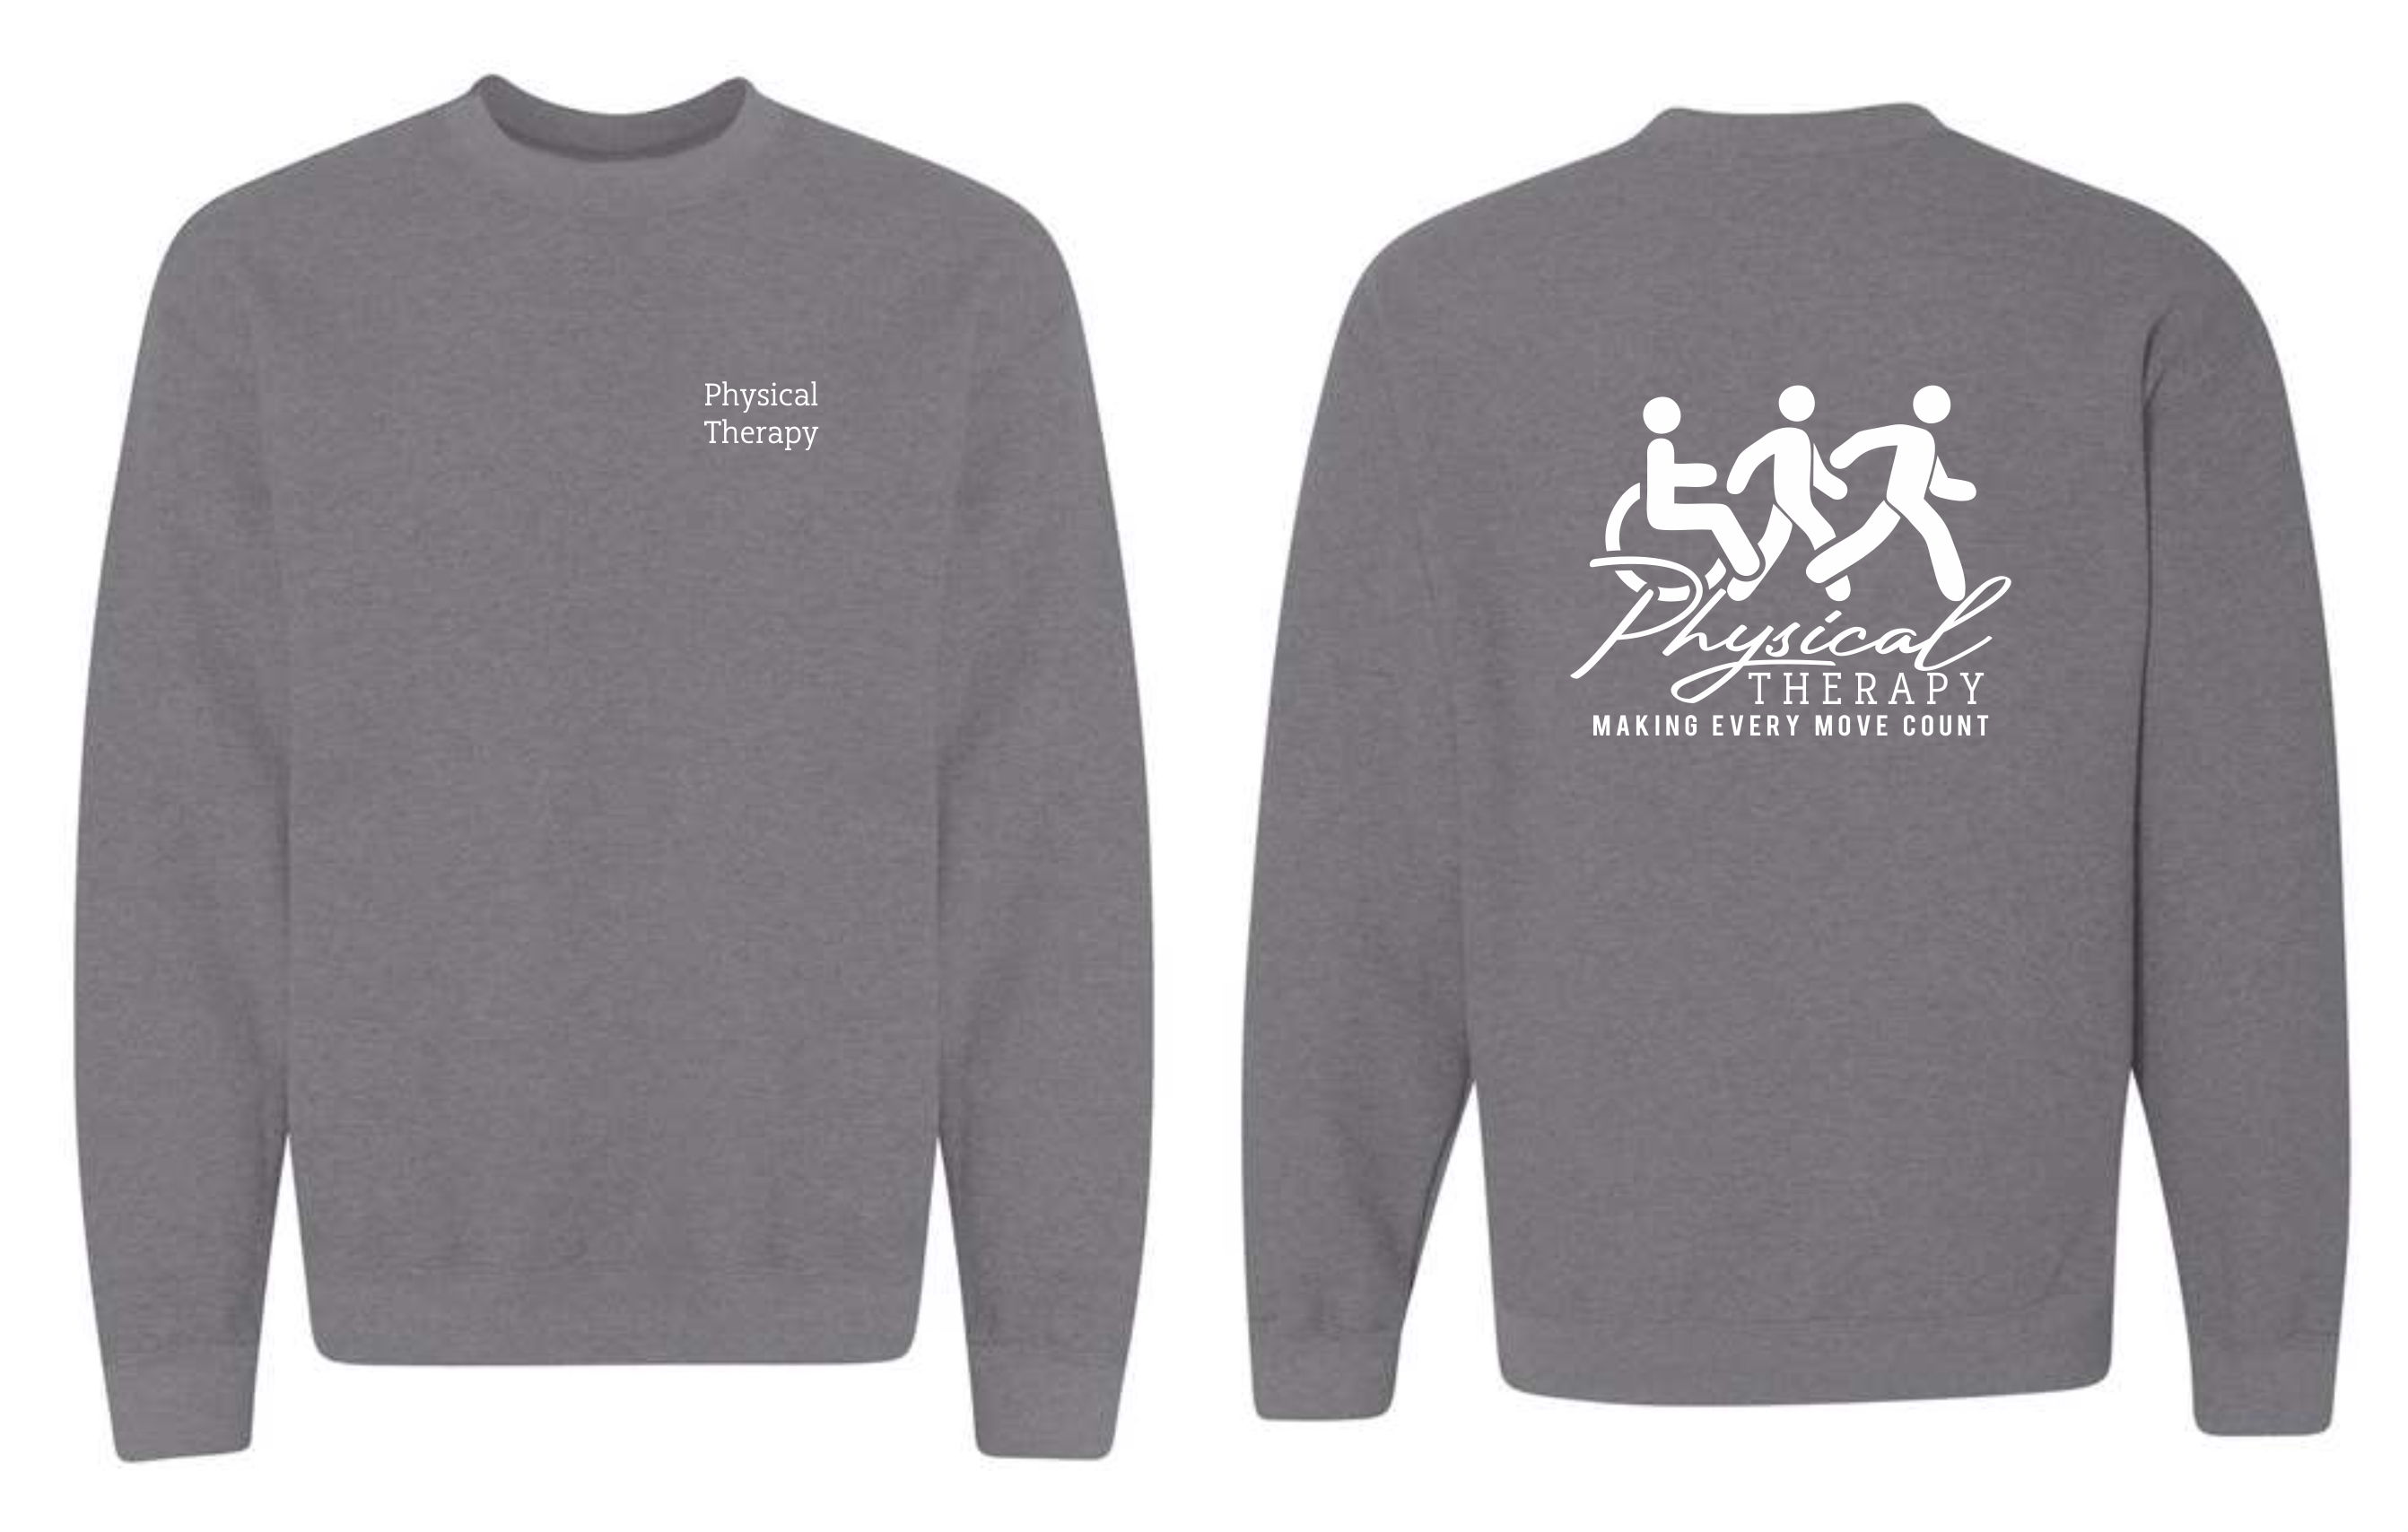 PHW - Physical Therapy Month - Cotton Crewneck Sweatshirt